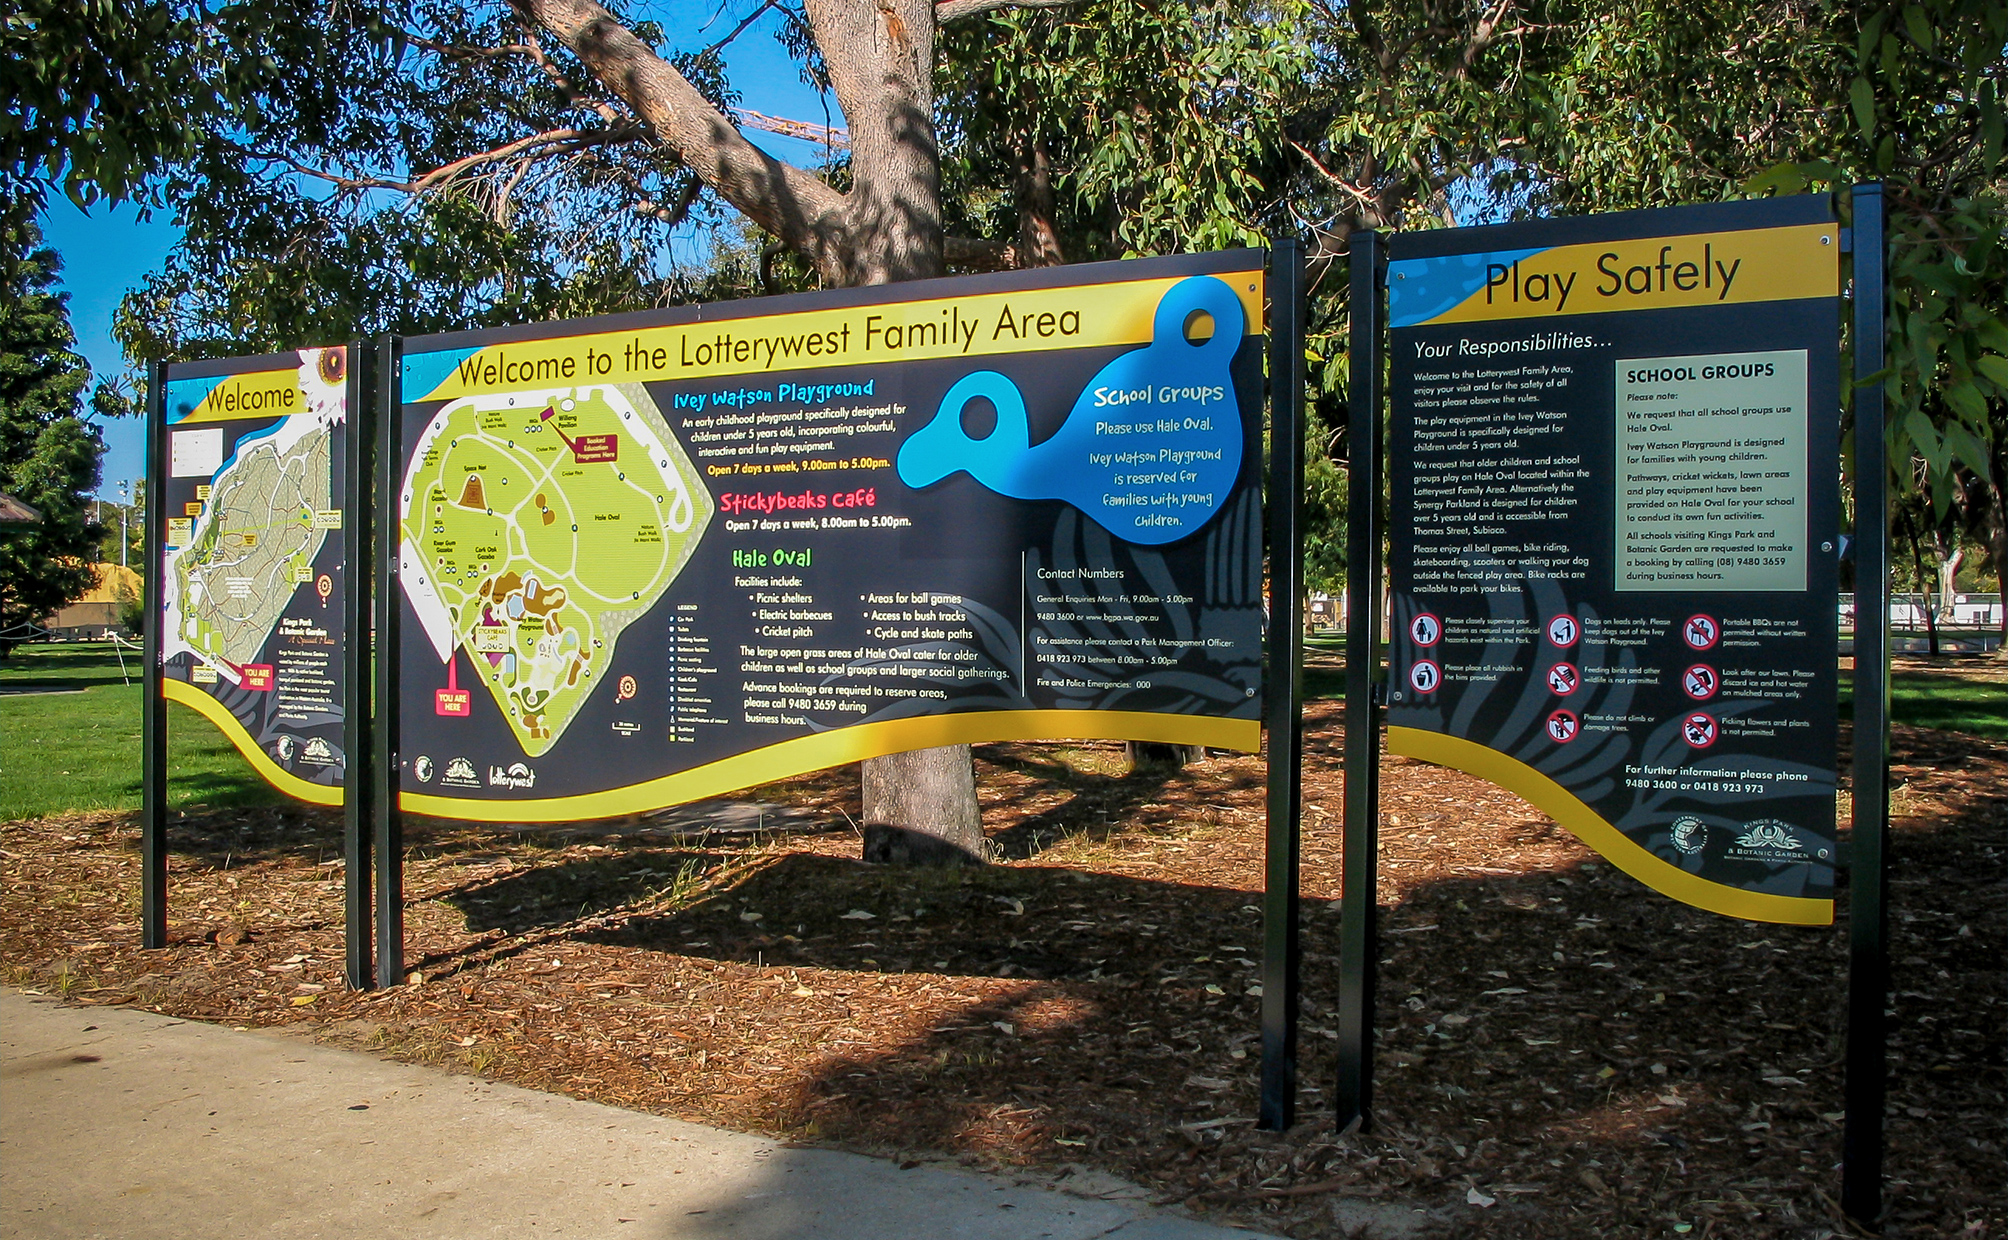 Welcome Sign and Map for the Lotterywest Family Area in King's Park, Perth